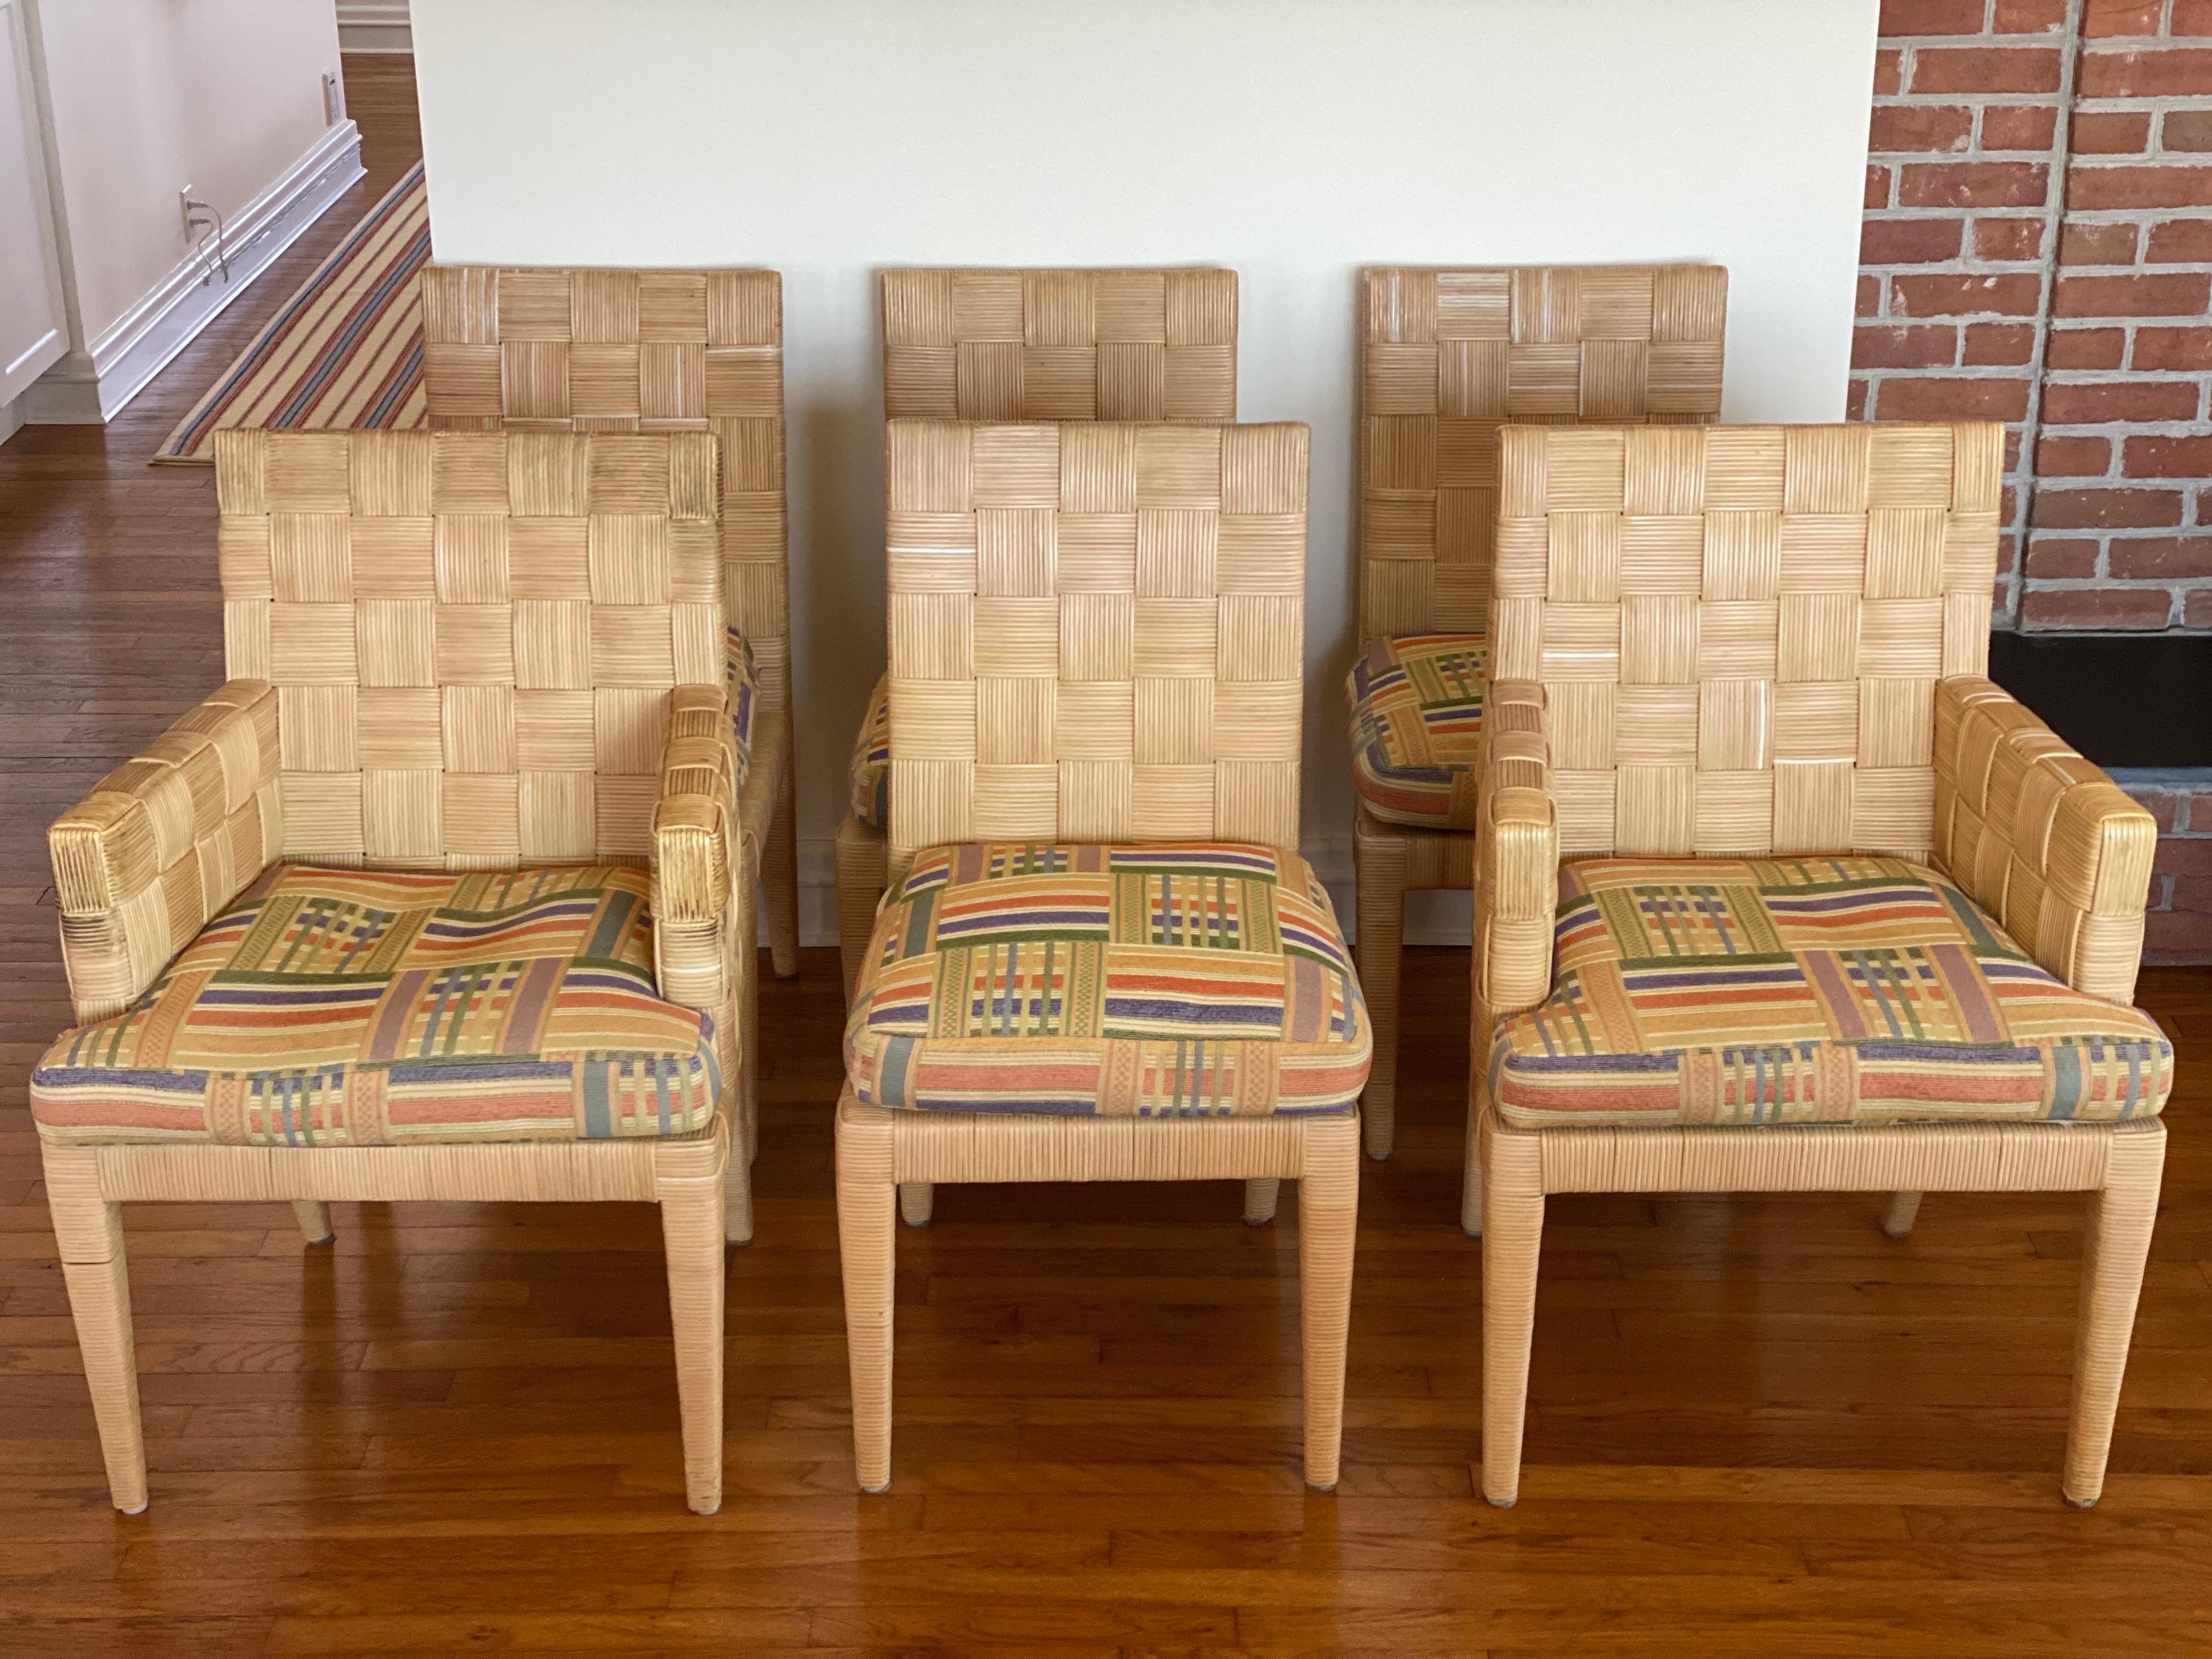 Set of Six Block Island Cane Club Chairs & Ottoman by John Hutton for Donghia, 1990s.
Two Armchairs
Four Side Chairs
A limited production, Block Island collection designed by John Hutton (1947-2006) for Donghia, circa 1995. This seating series is